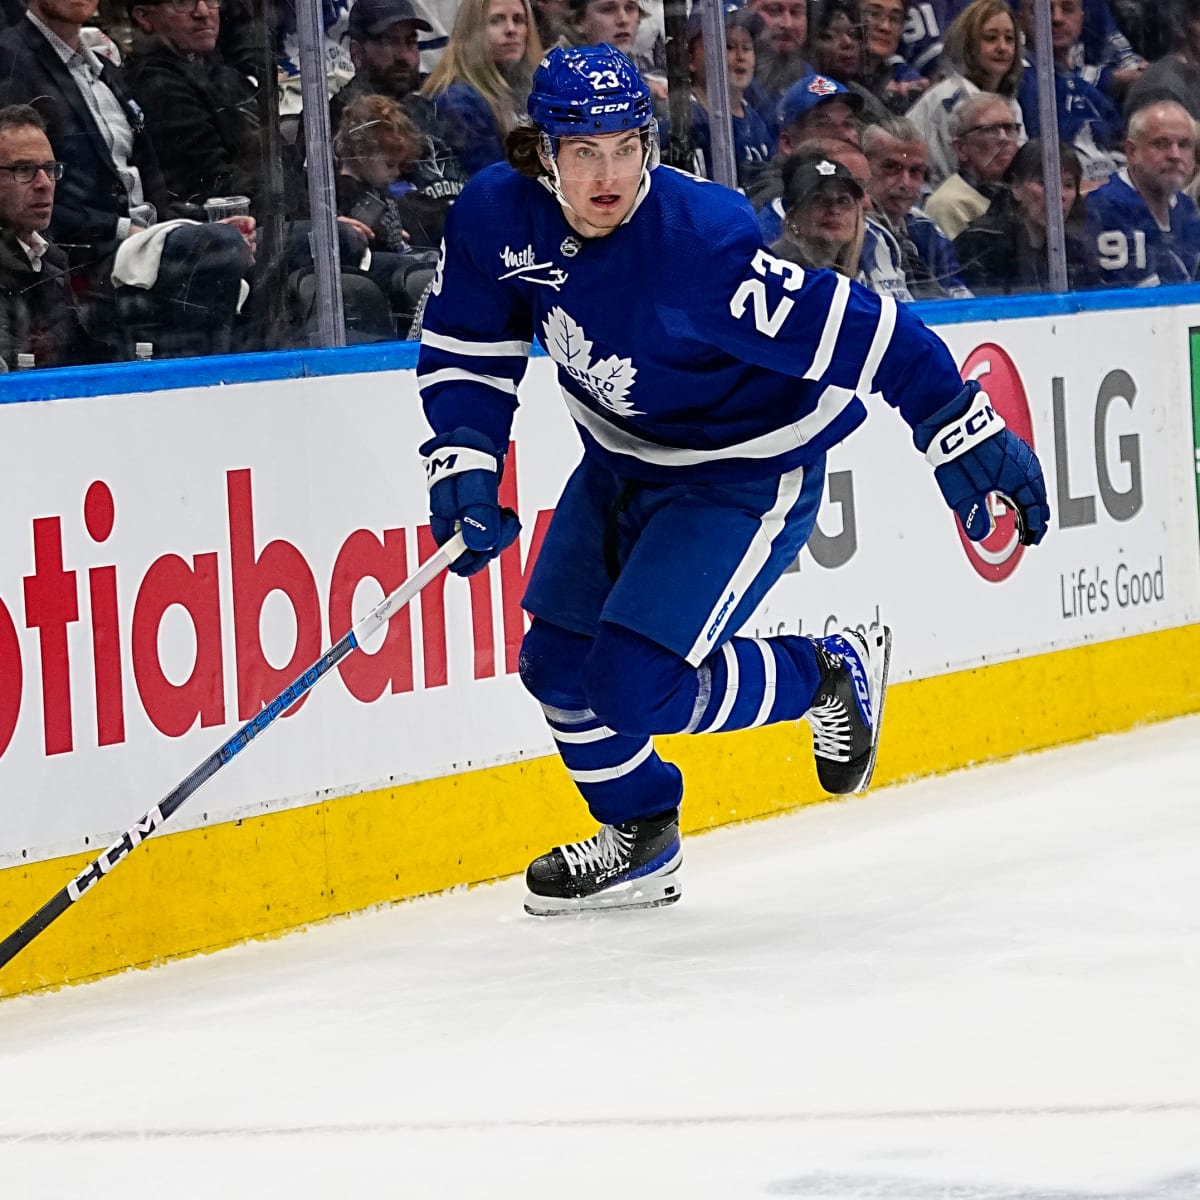 Toronto Maple Leafs: What Would a Marlies Calder Cup Mean to Leafs